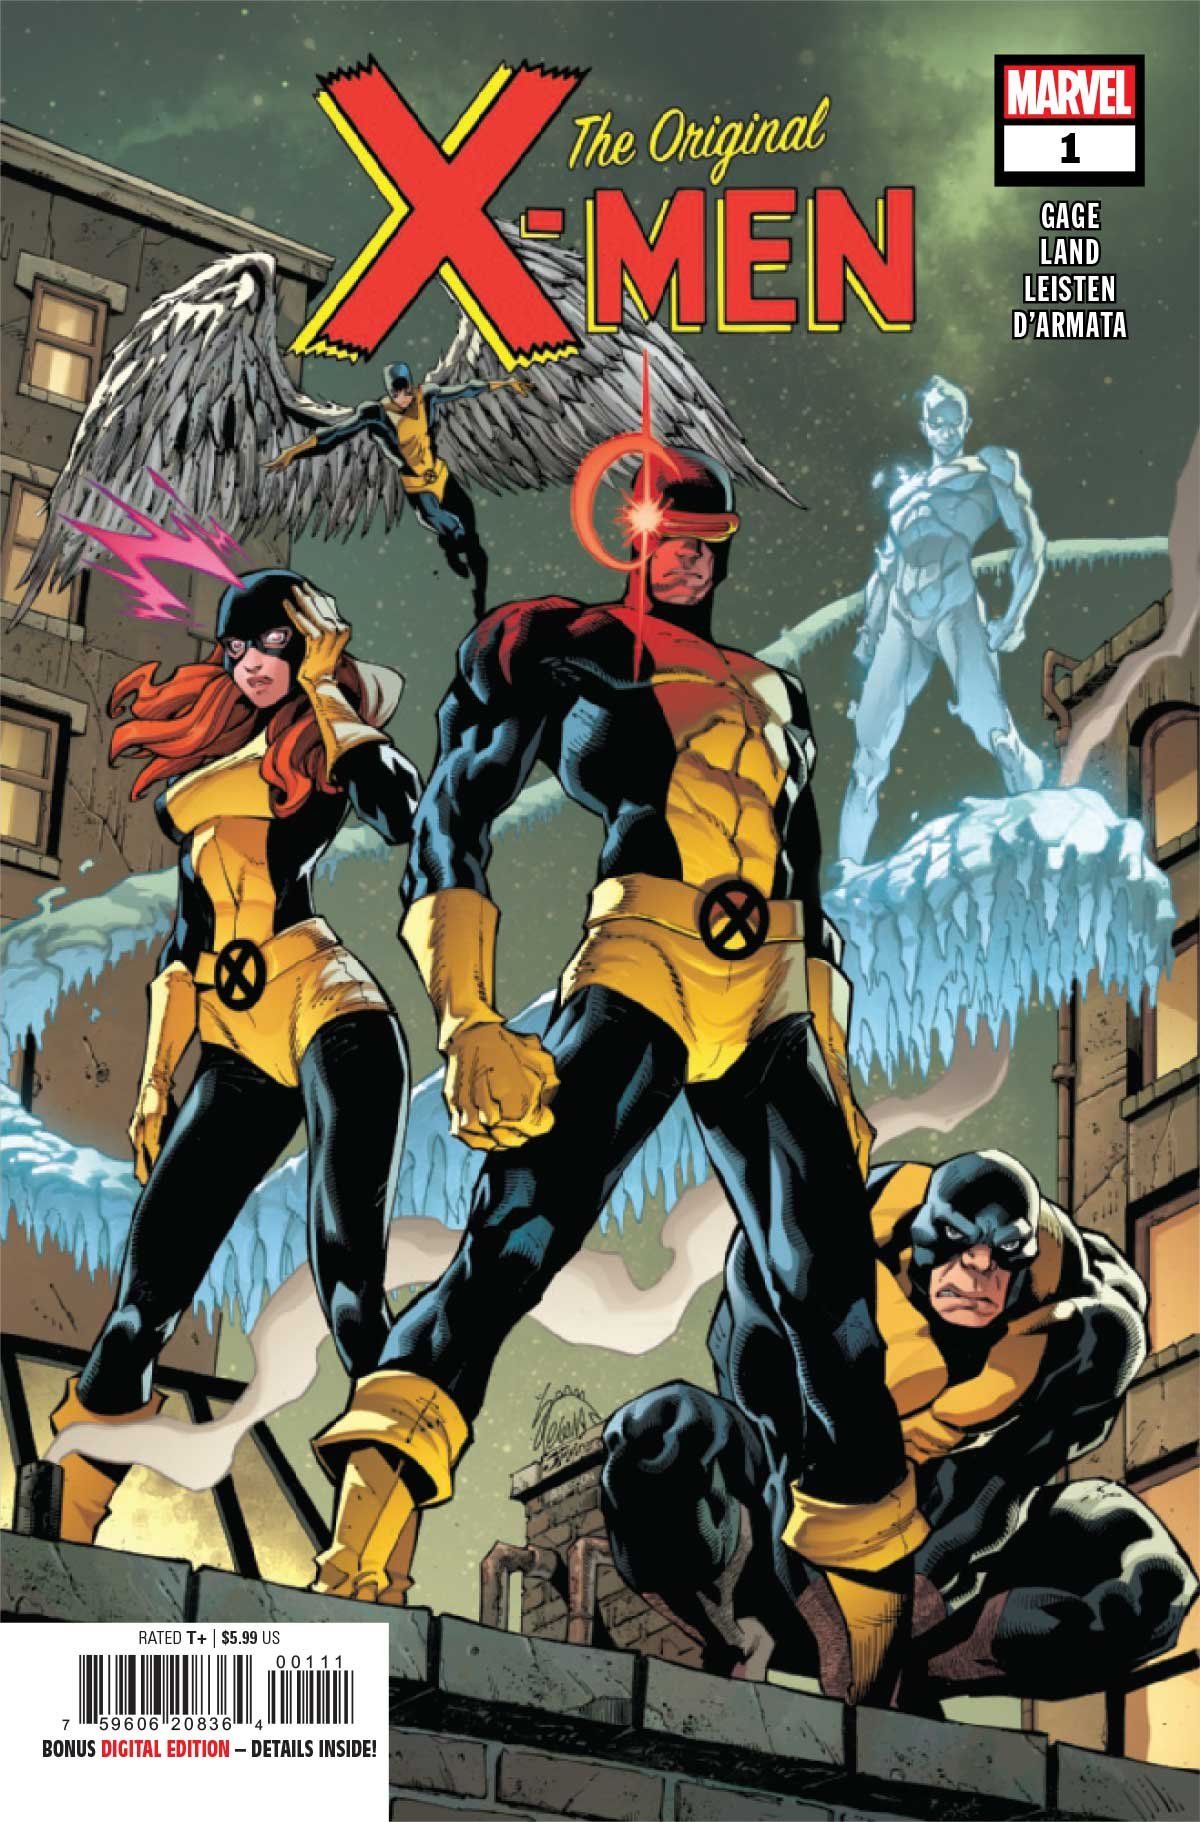 Cyclops, Marvel Girl, Beast, Iceman, and Angel are standing on top of a building.